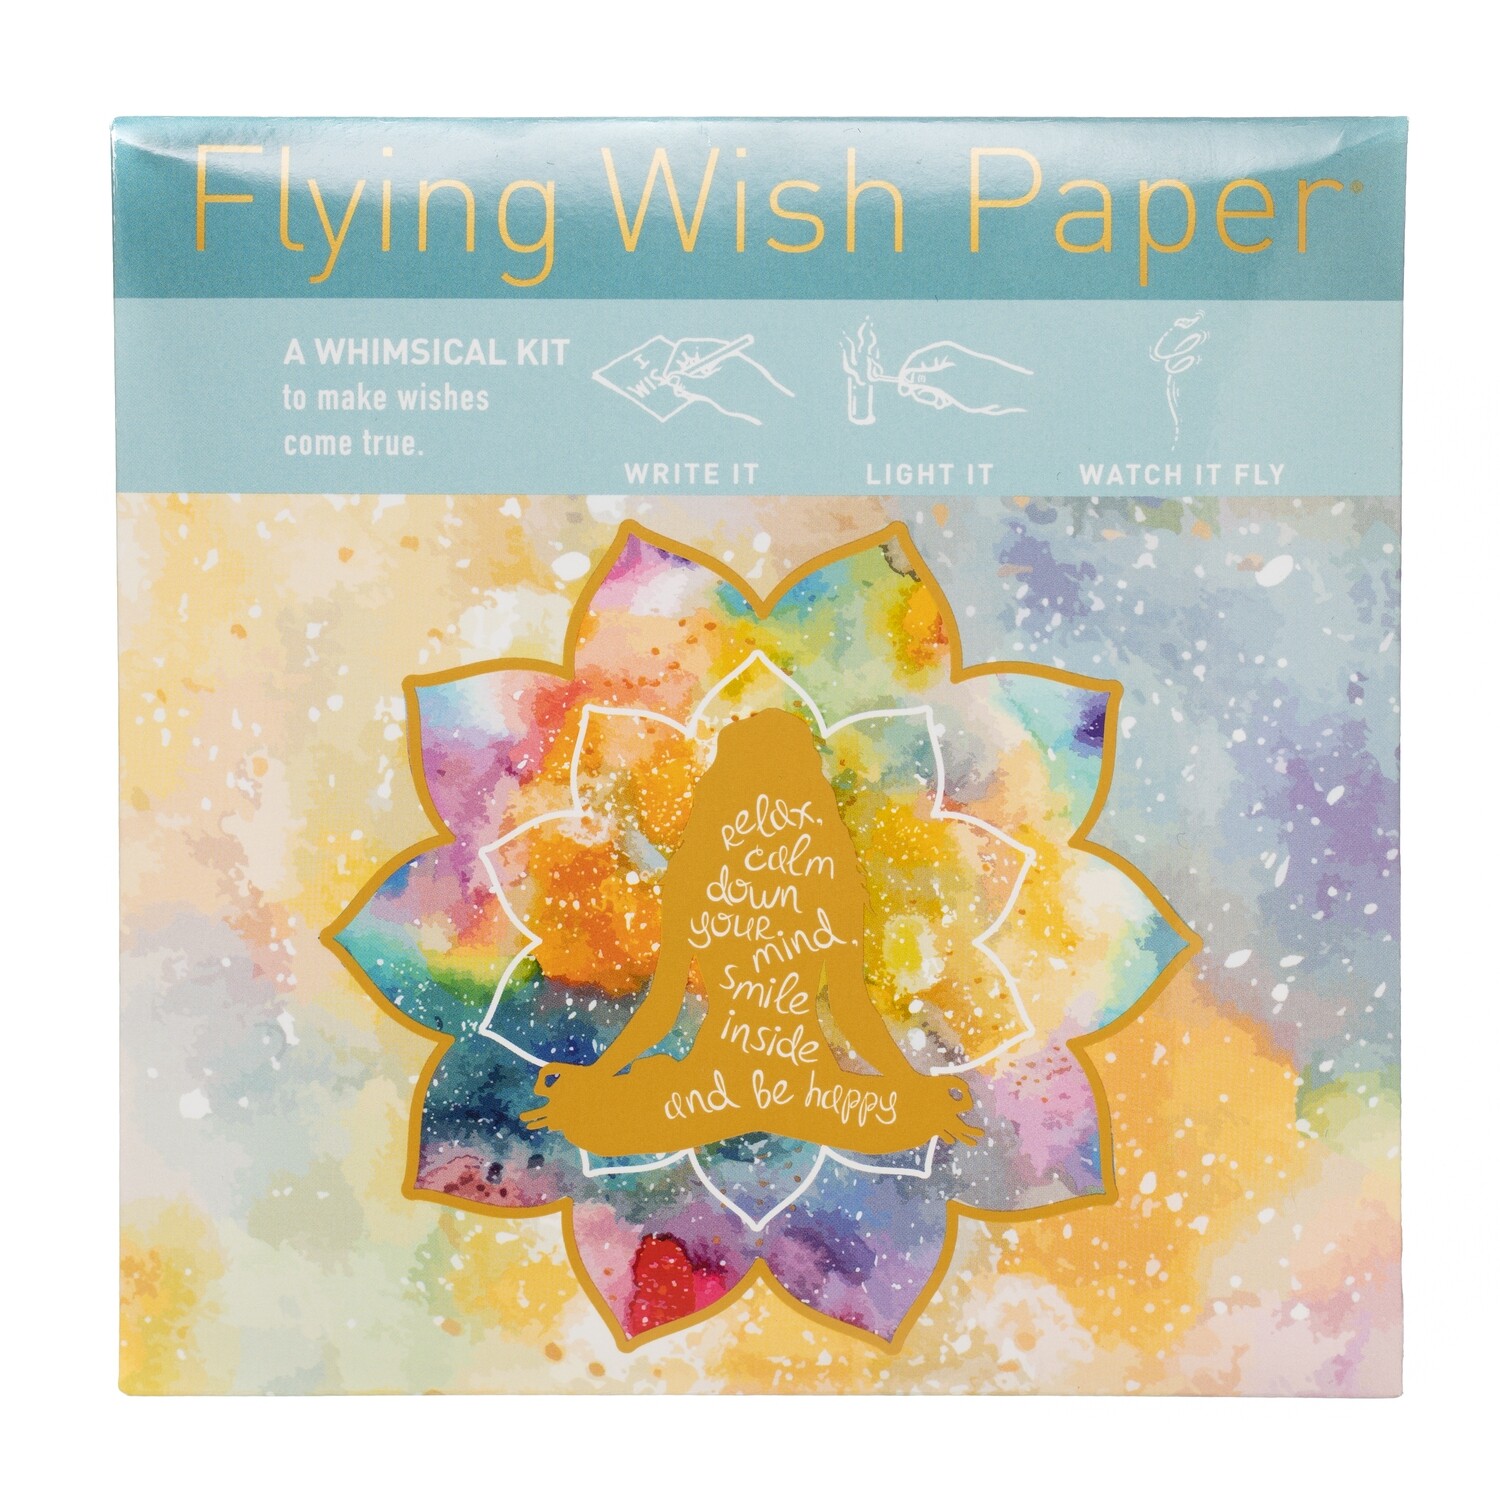 Flying Wishing Paper Mindfulness